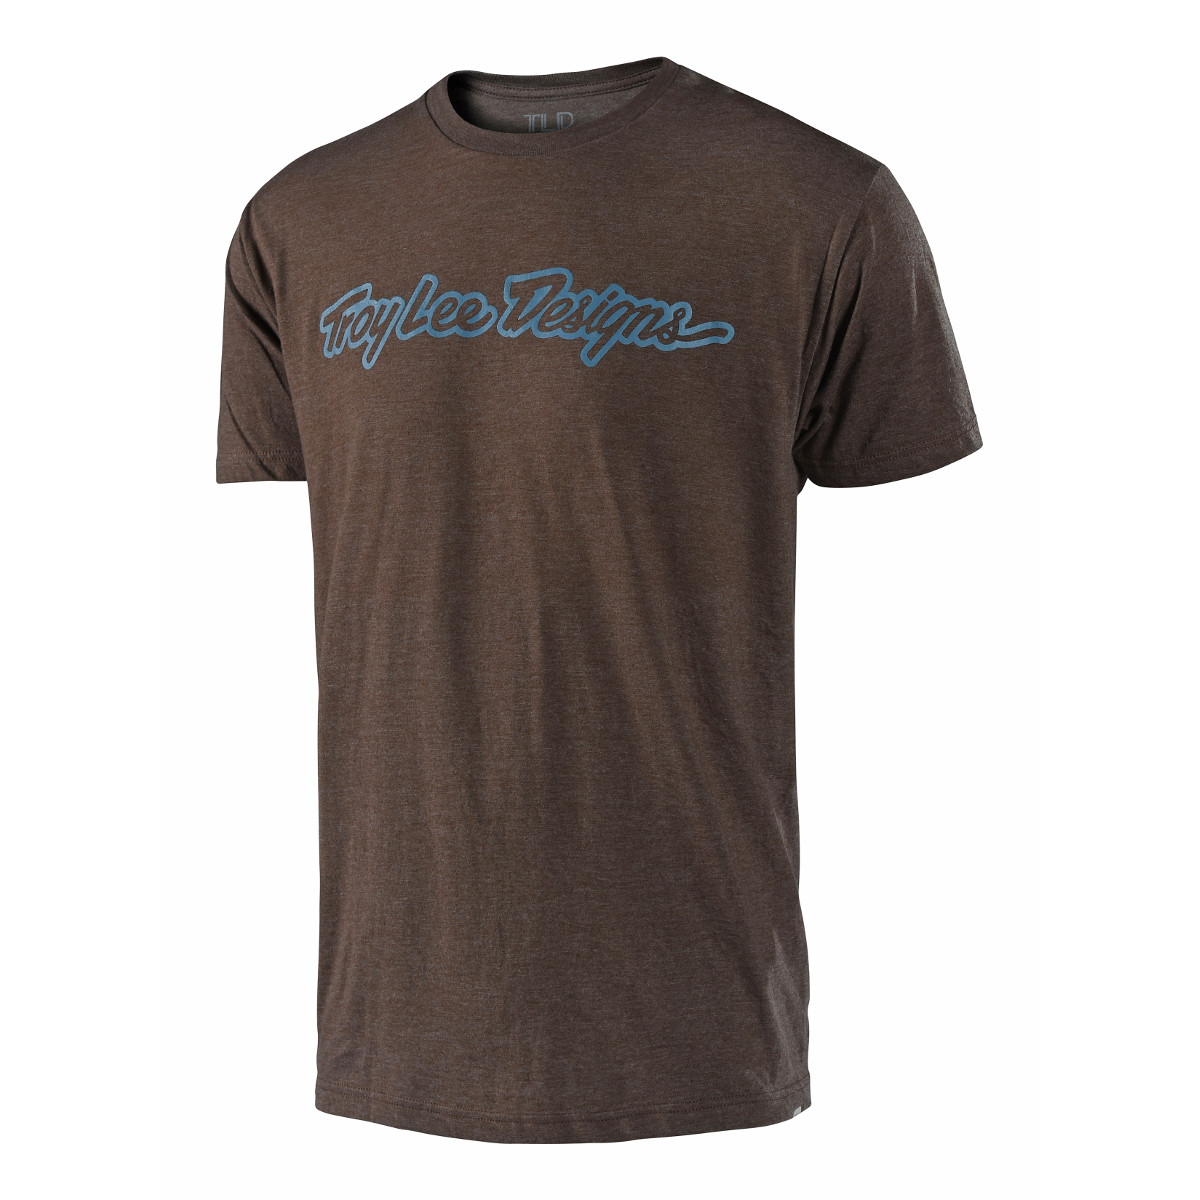 Troy Lee Designs T-Shirt Signature Heather Brown